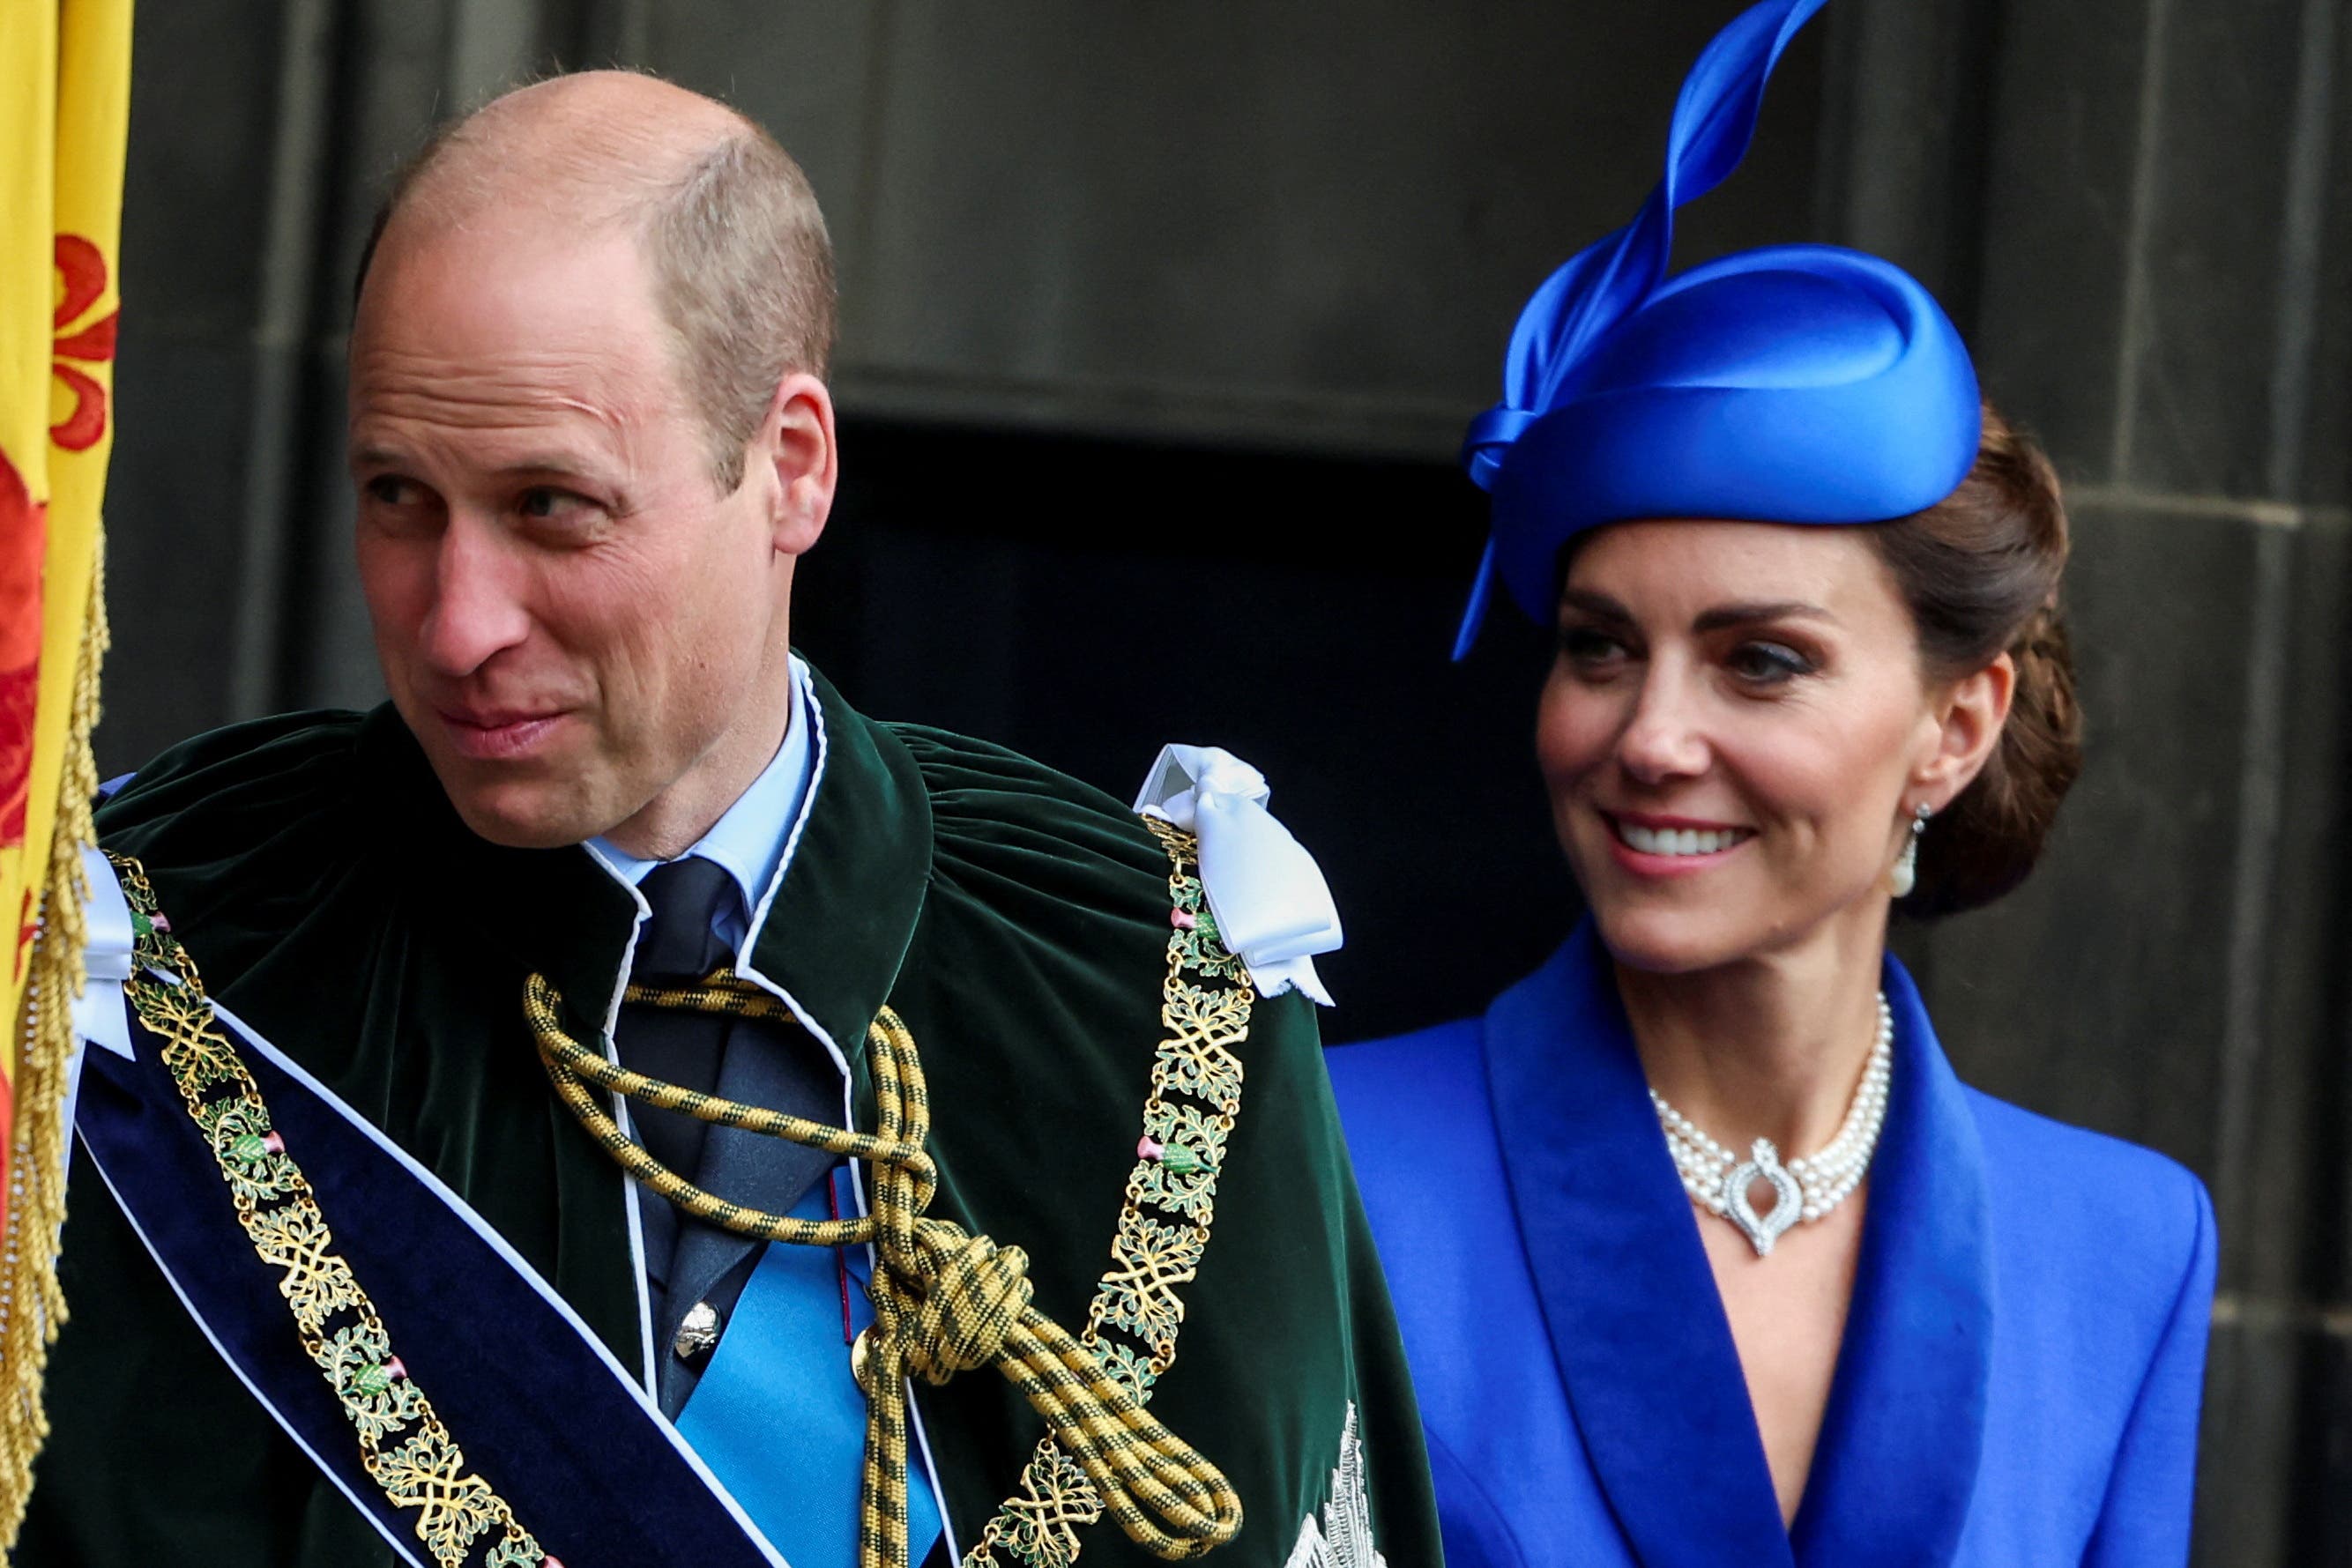 The book looks at favourable coverage in the media of William and Kate